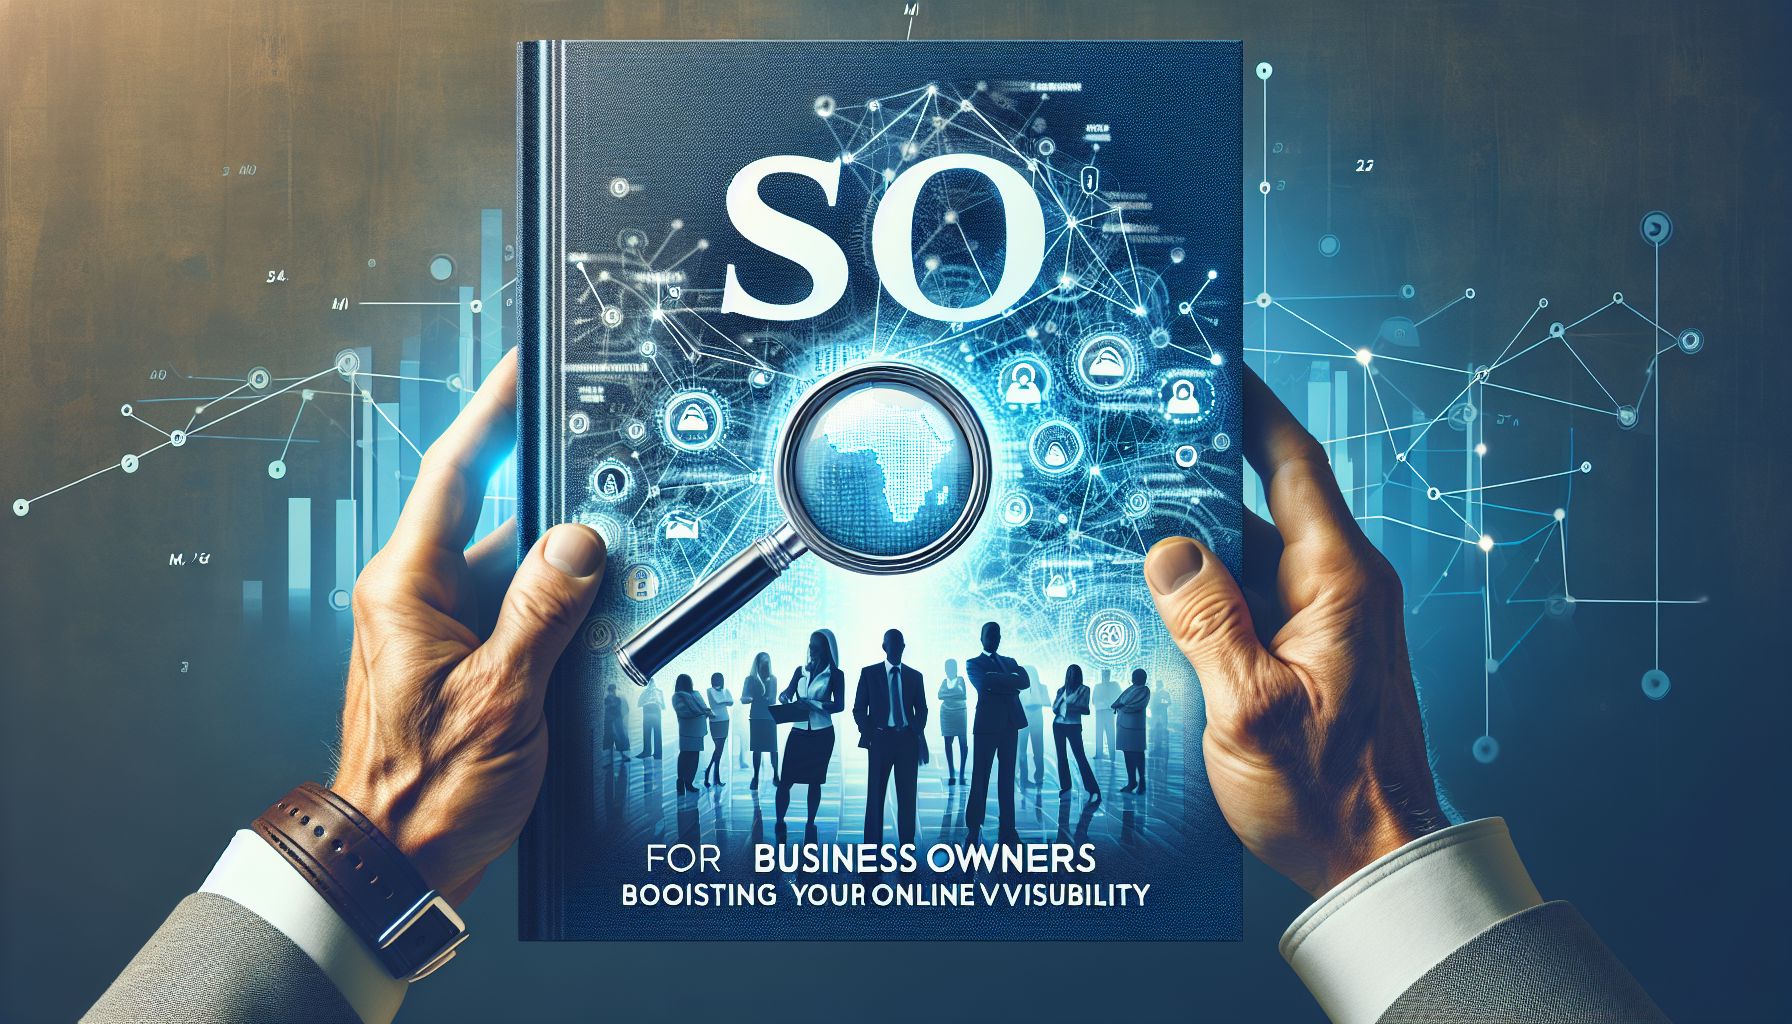 SEO for Business Owners: Boosting Your Online Visibility